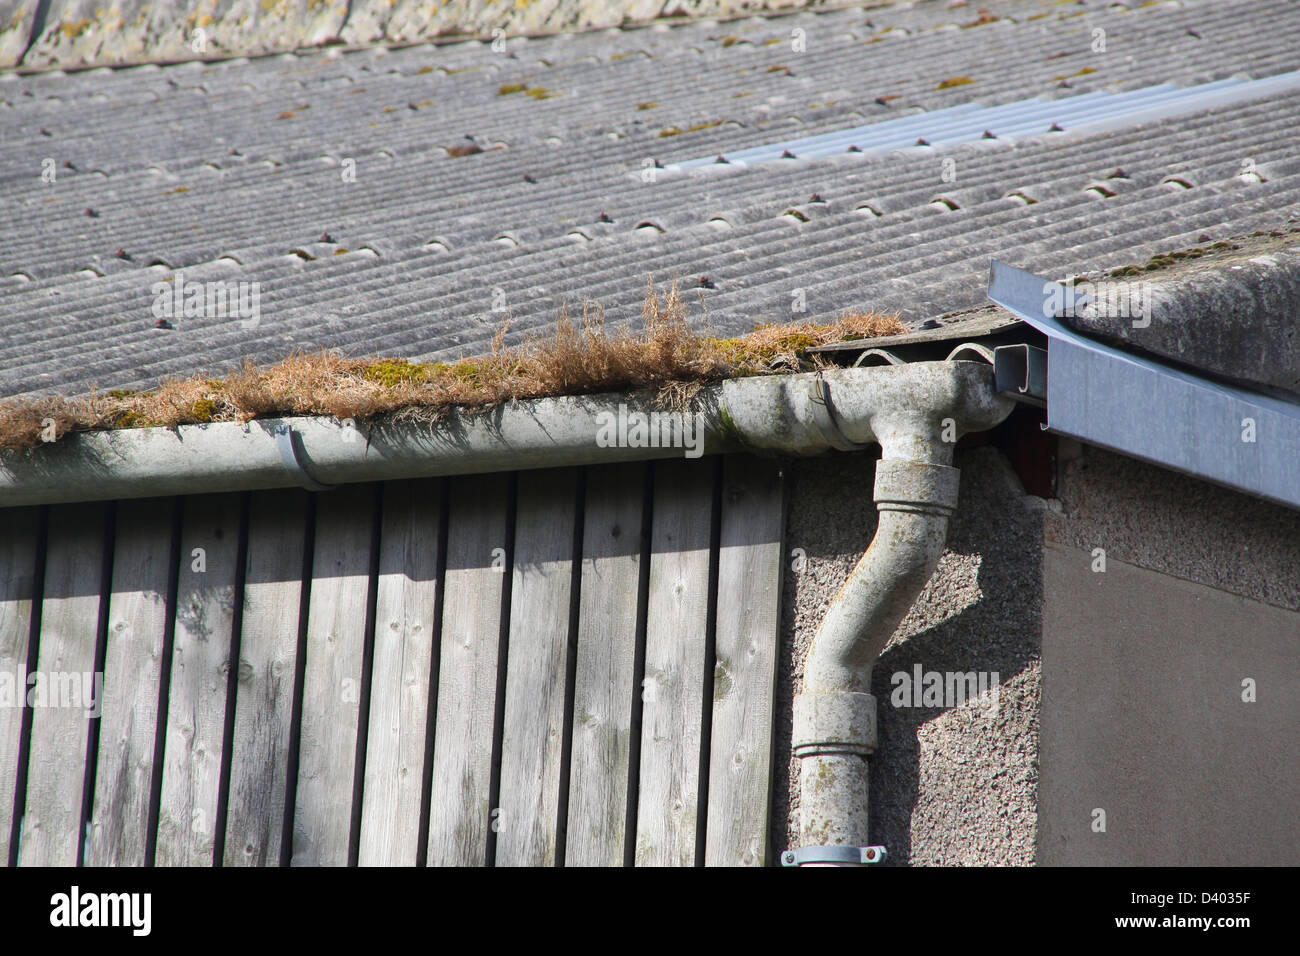 Asbestos Cement High Resolution Stock Photography And Images Alamy